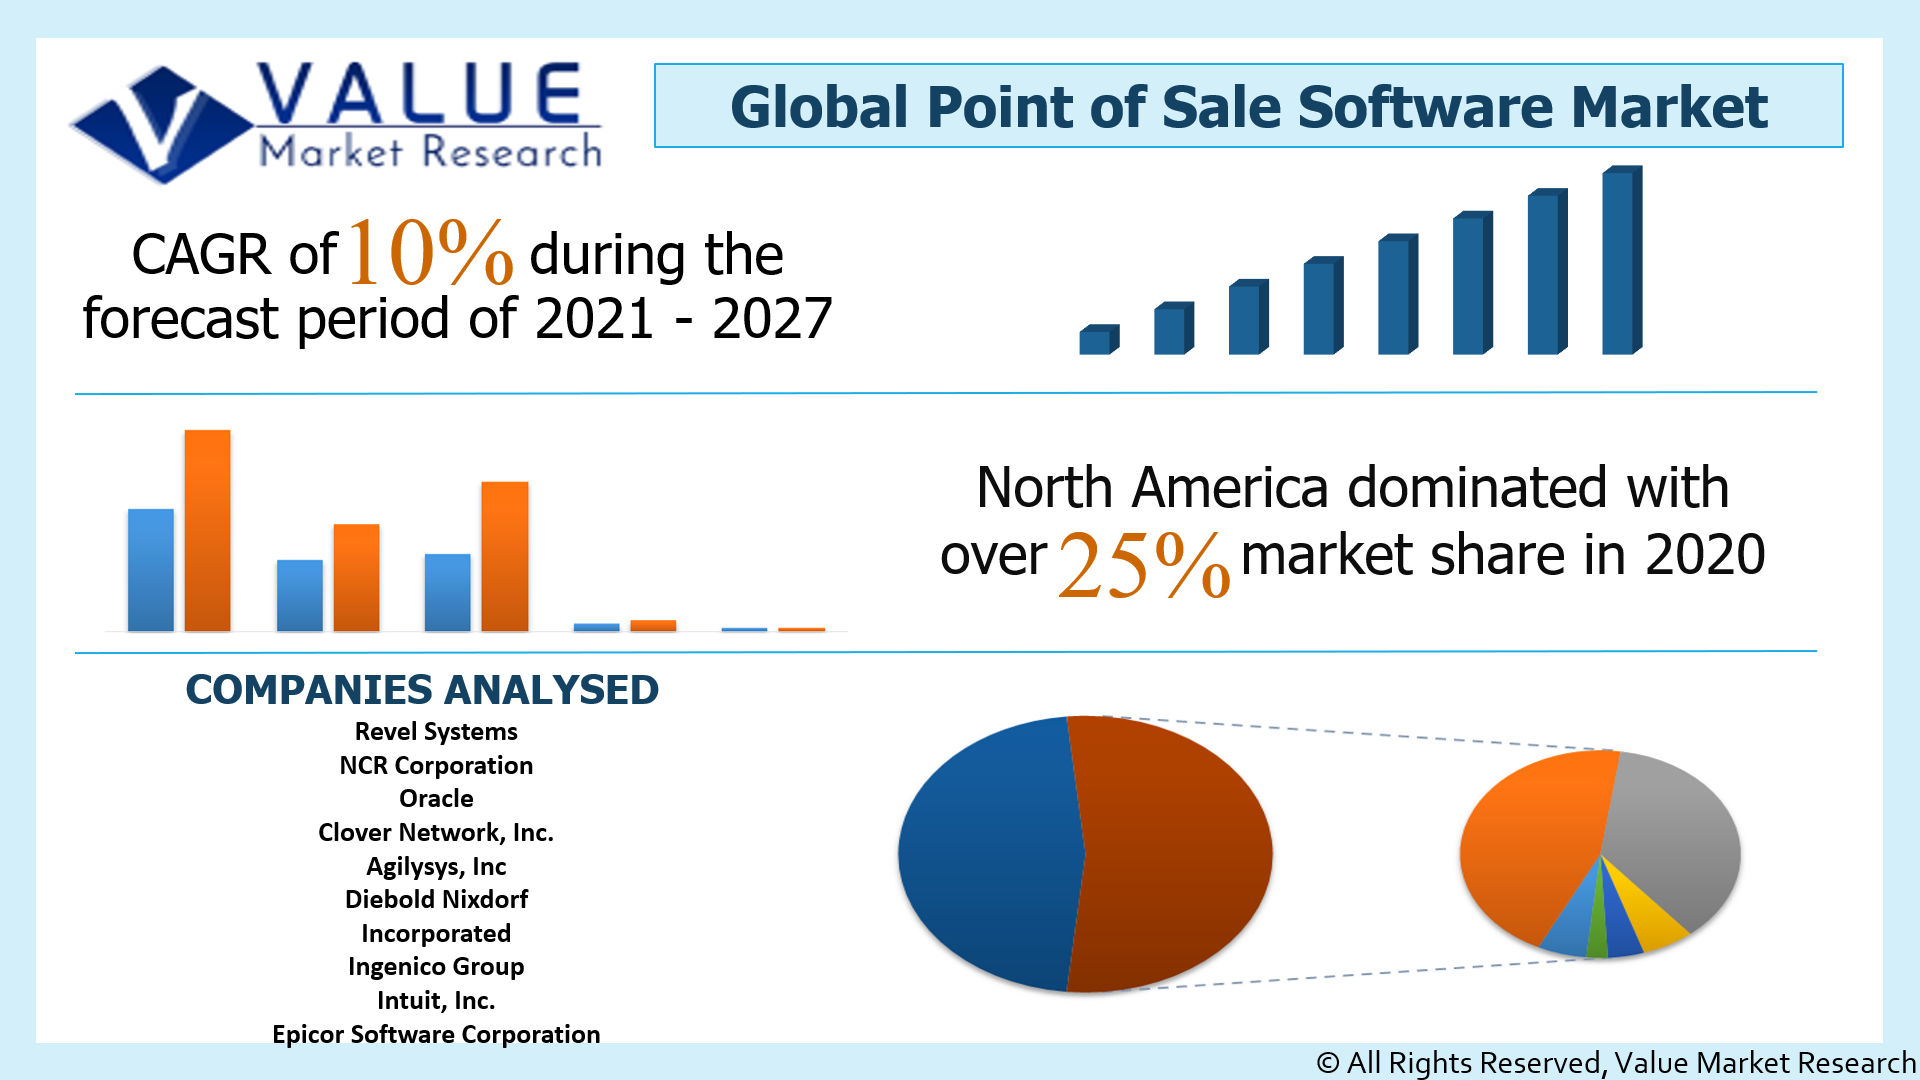 Global Point of Sale Software Market Share